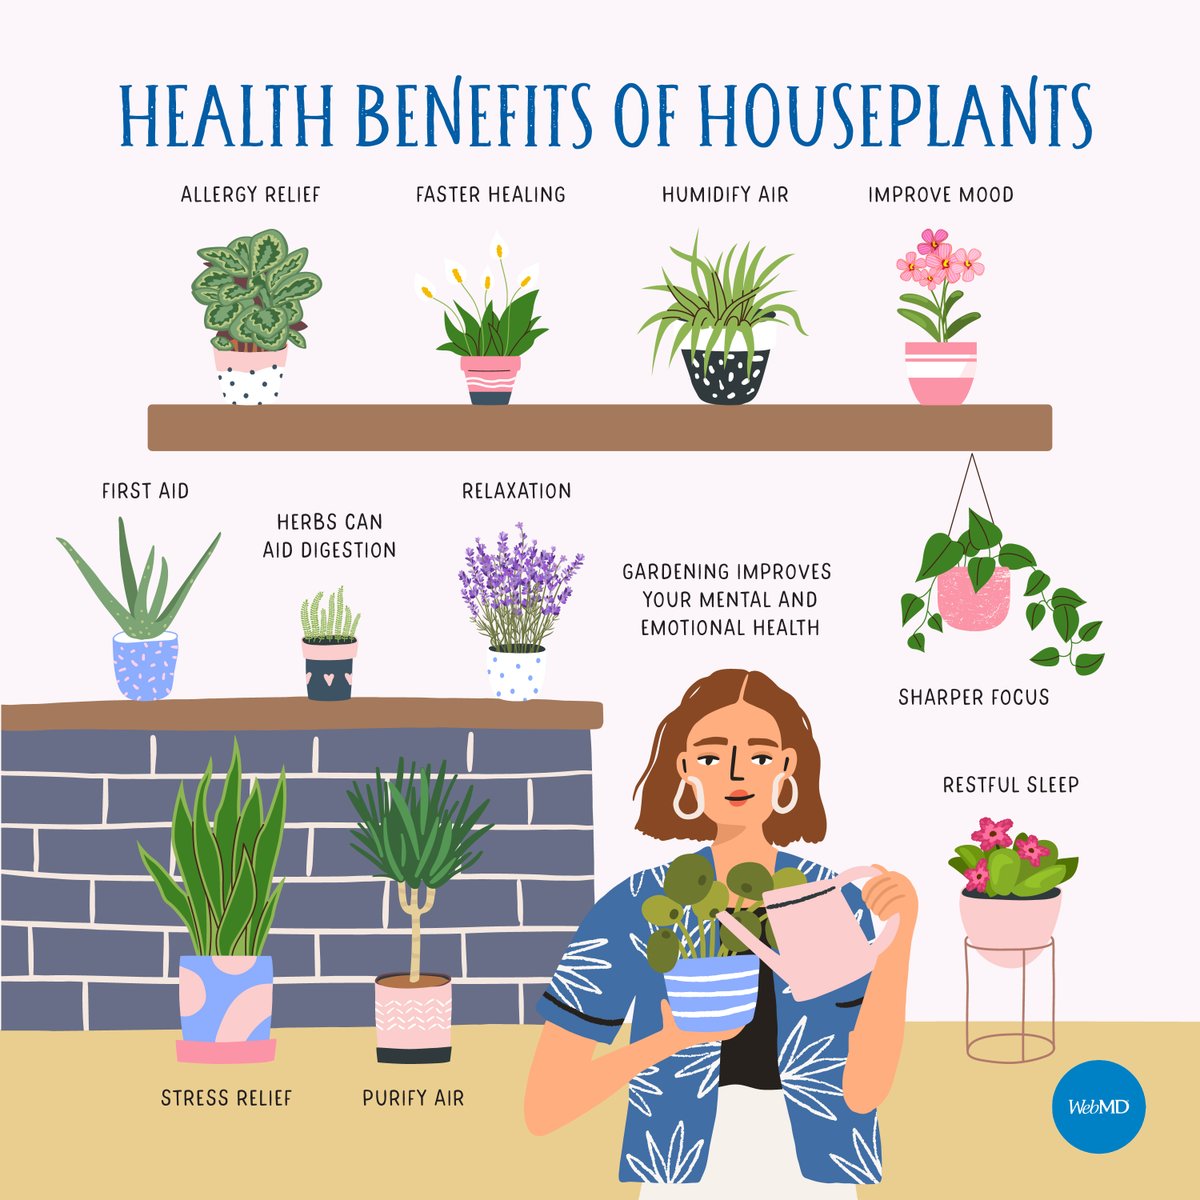 Researchers found that rooms with plants have less dust and mold than rooms without any foliage. Here are other health benefits from having houseplants: wb.md/3WjgjM7